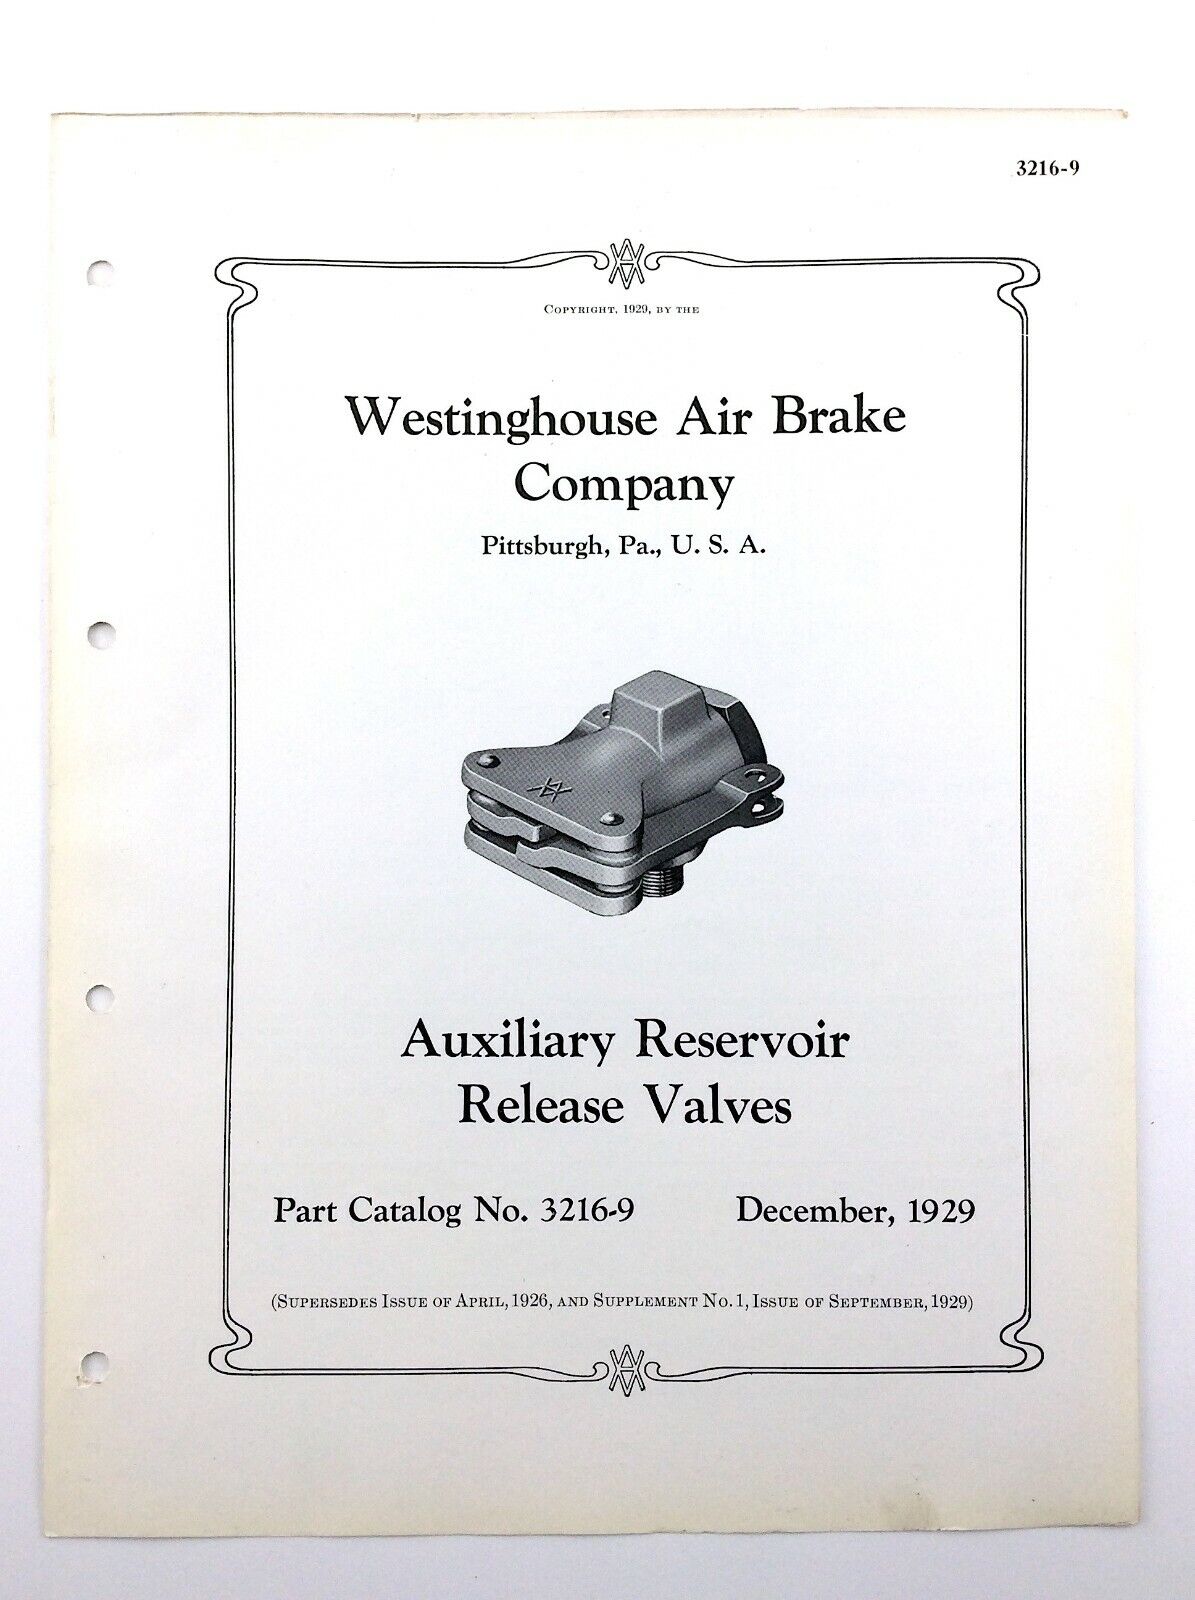 Westinghouse Air Brake Company Auxiliary Release Valves 1929 Part Catalog Q536